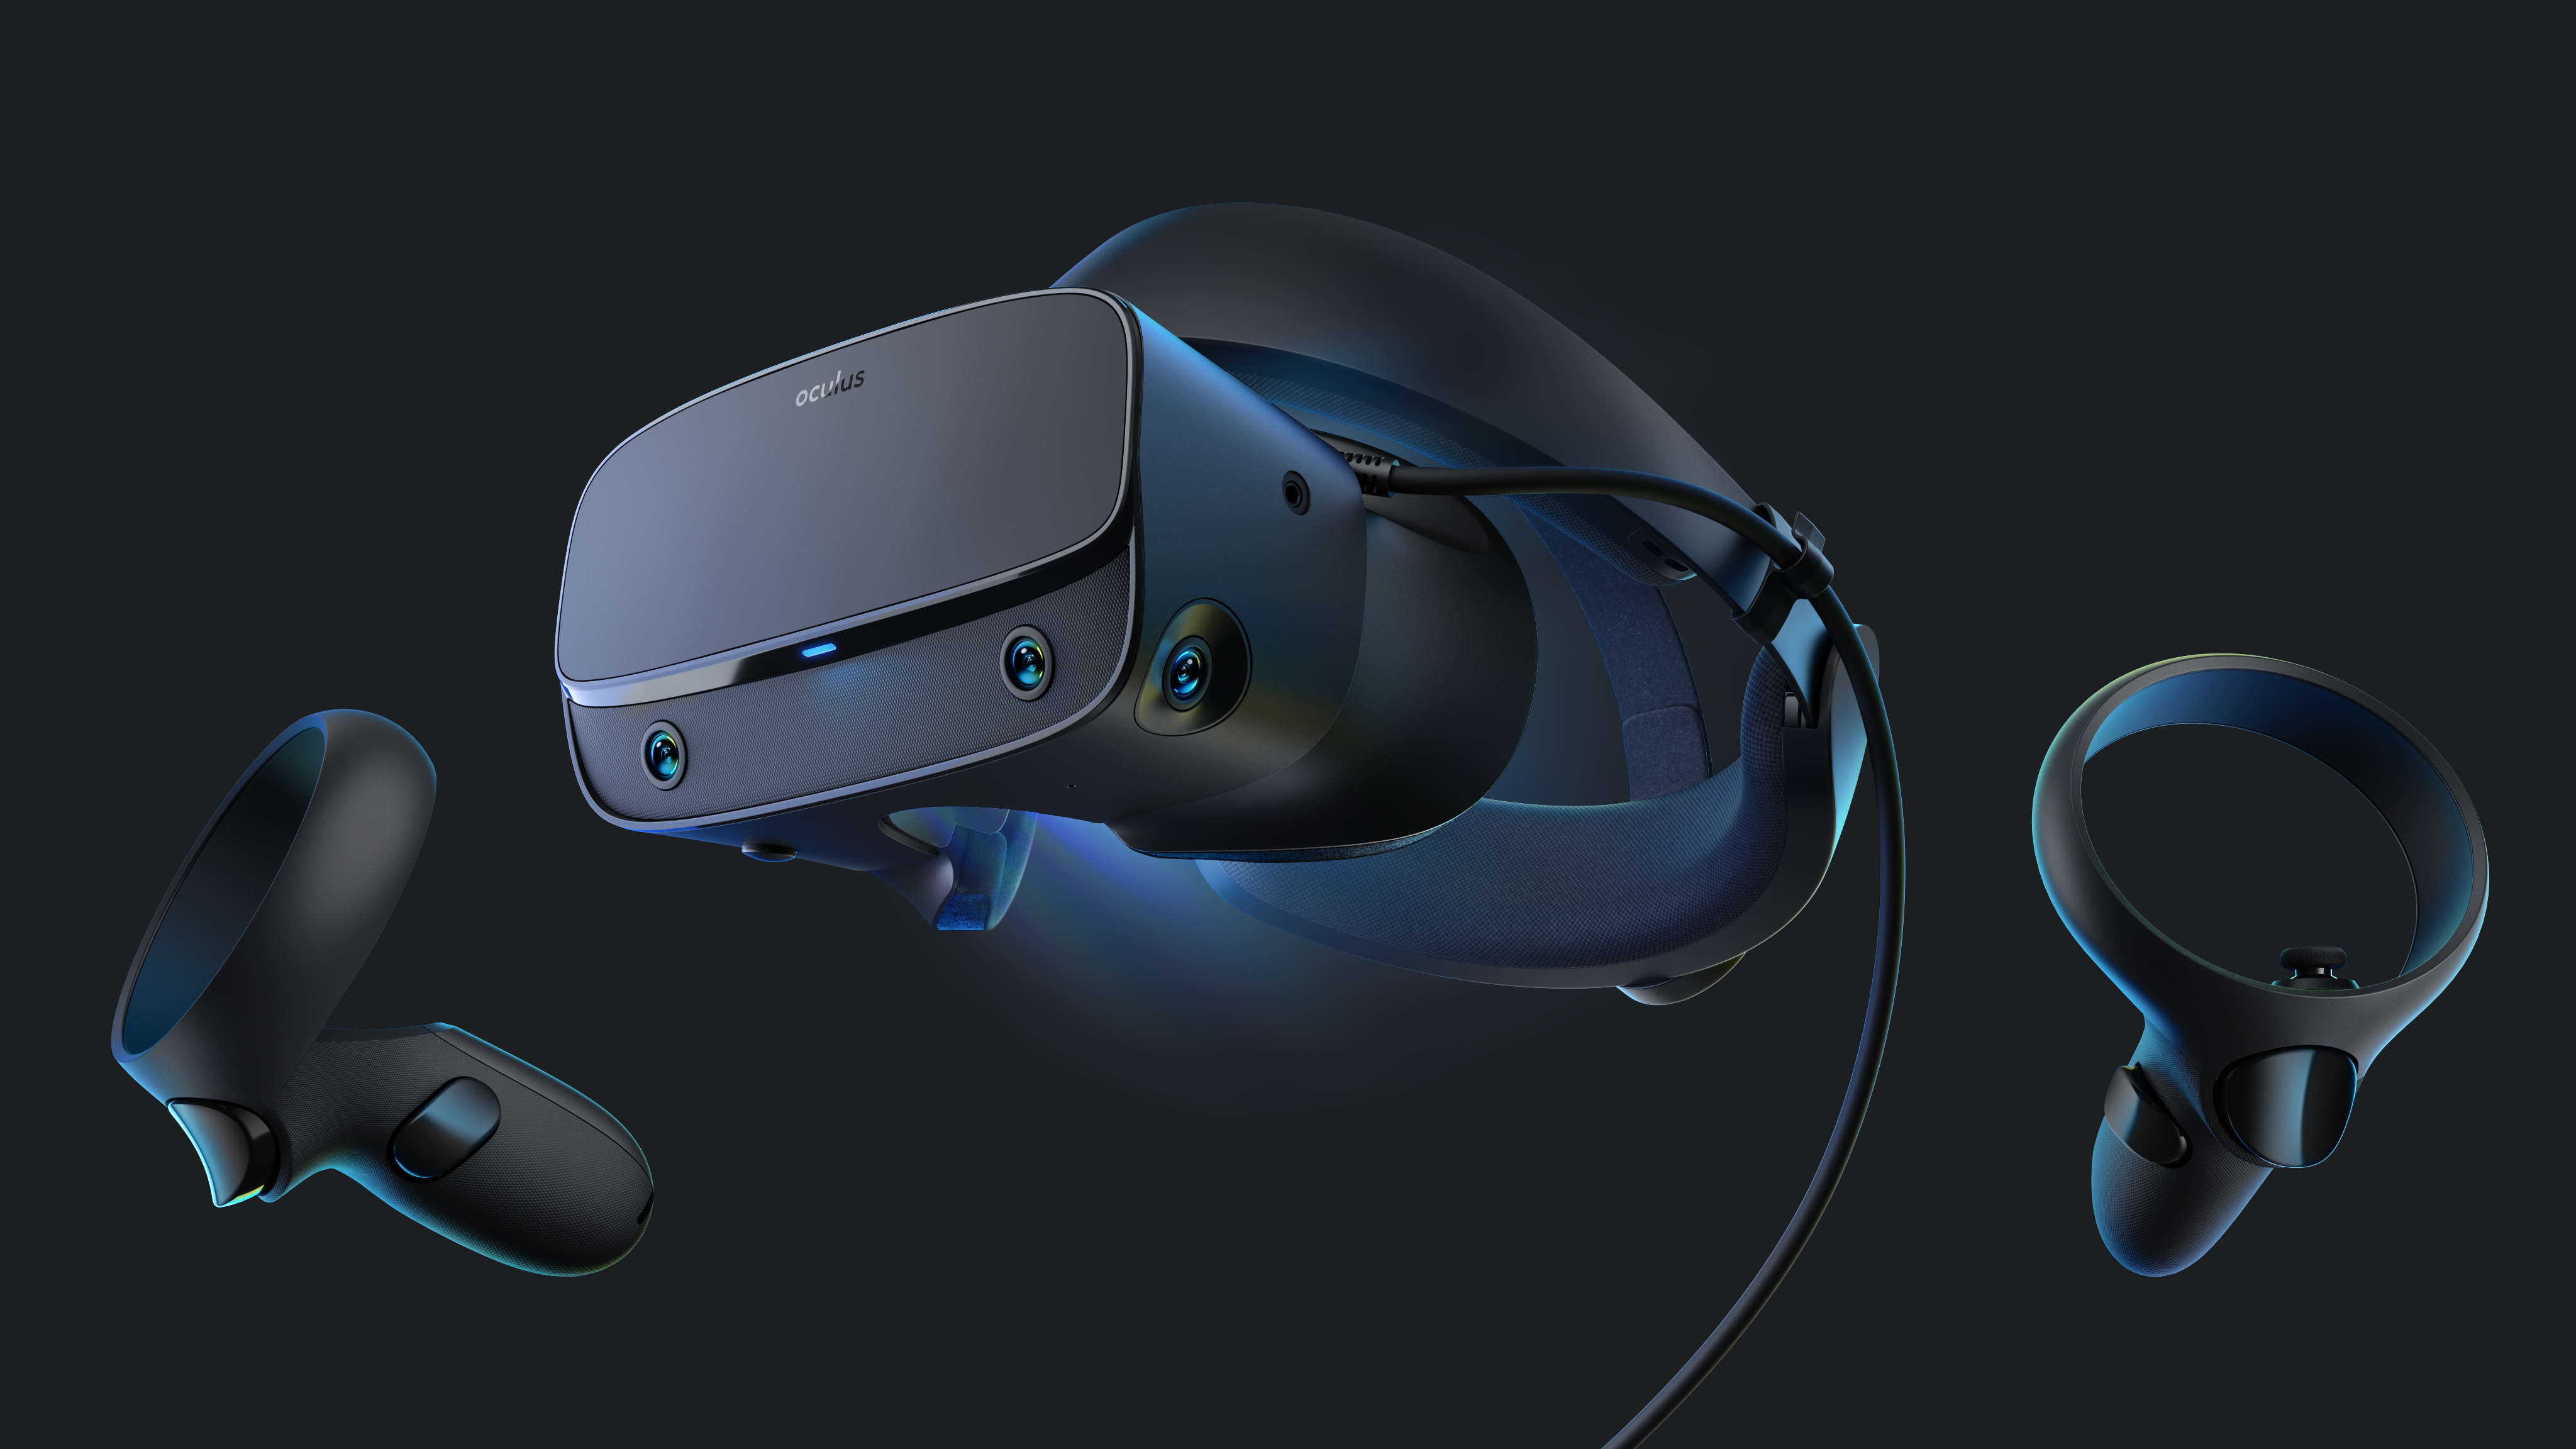 genetisk Duplikere teenagere The Oculus Rift S is real and arrives in spring for $399 | TechCrunch